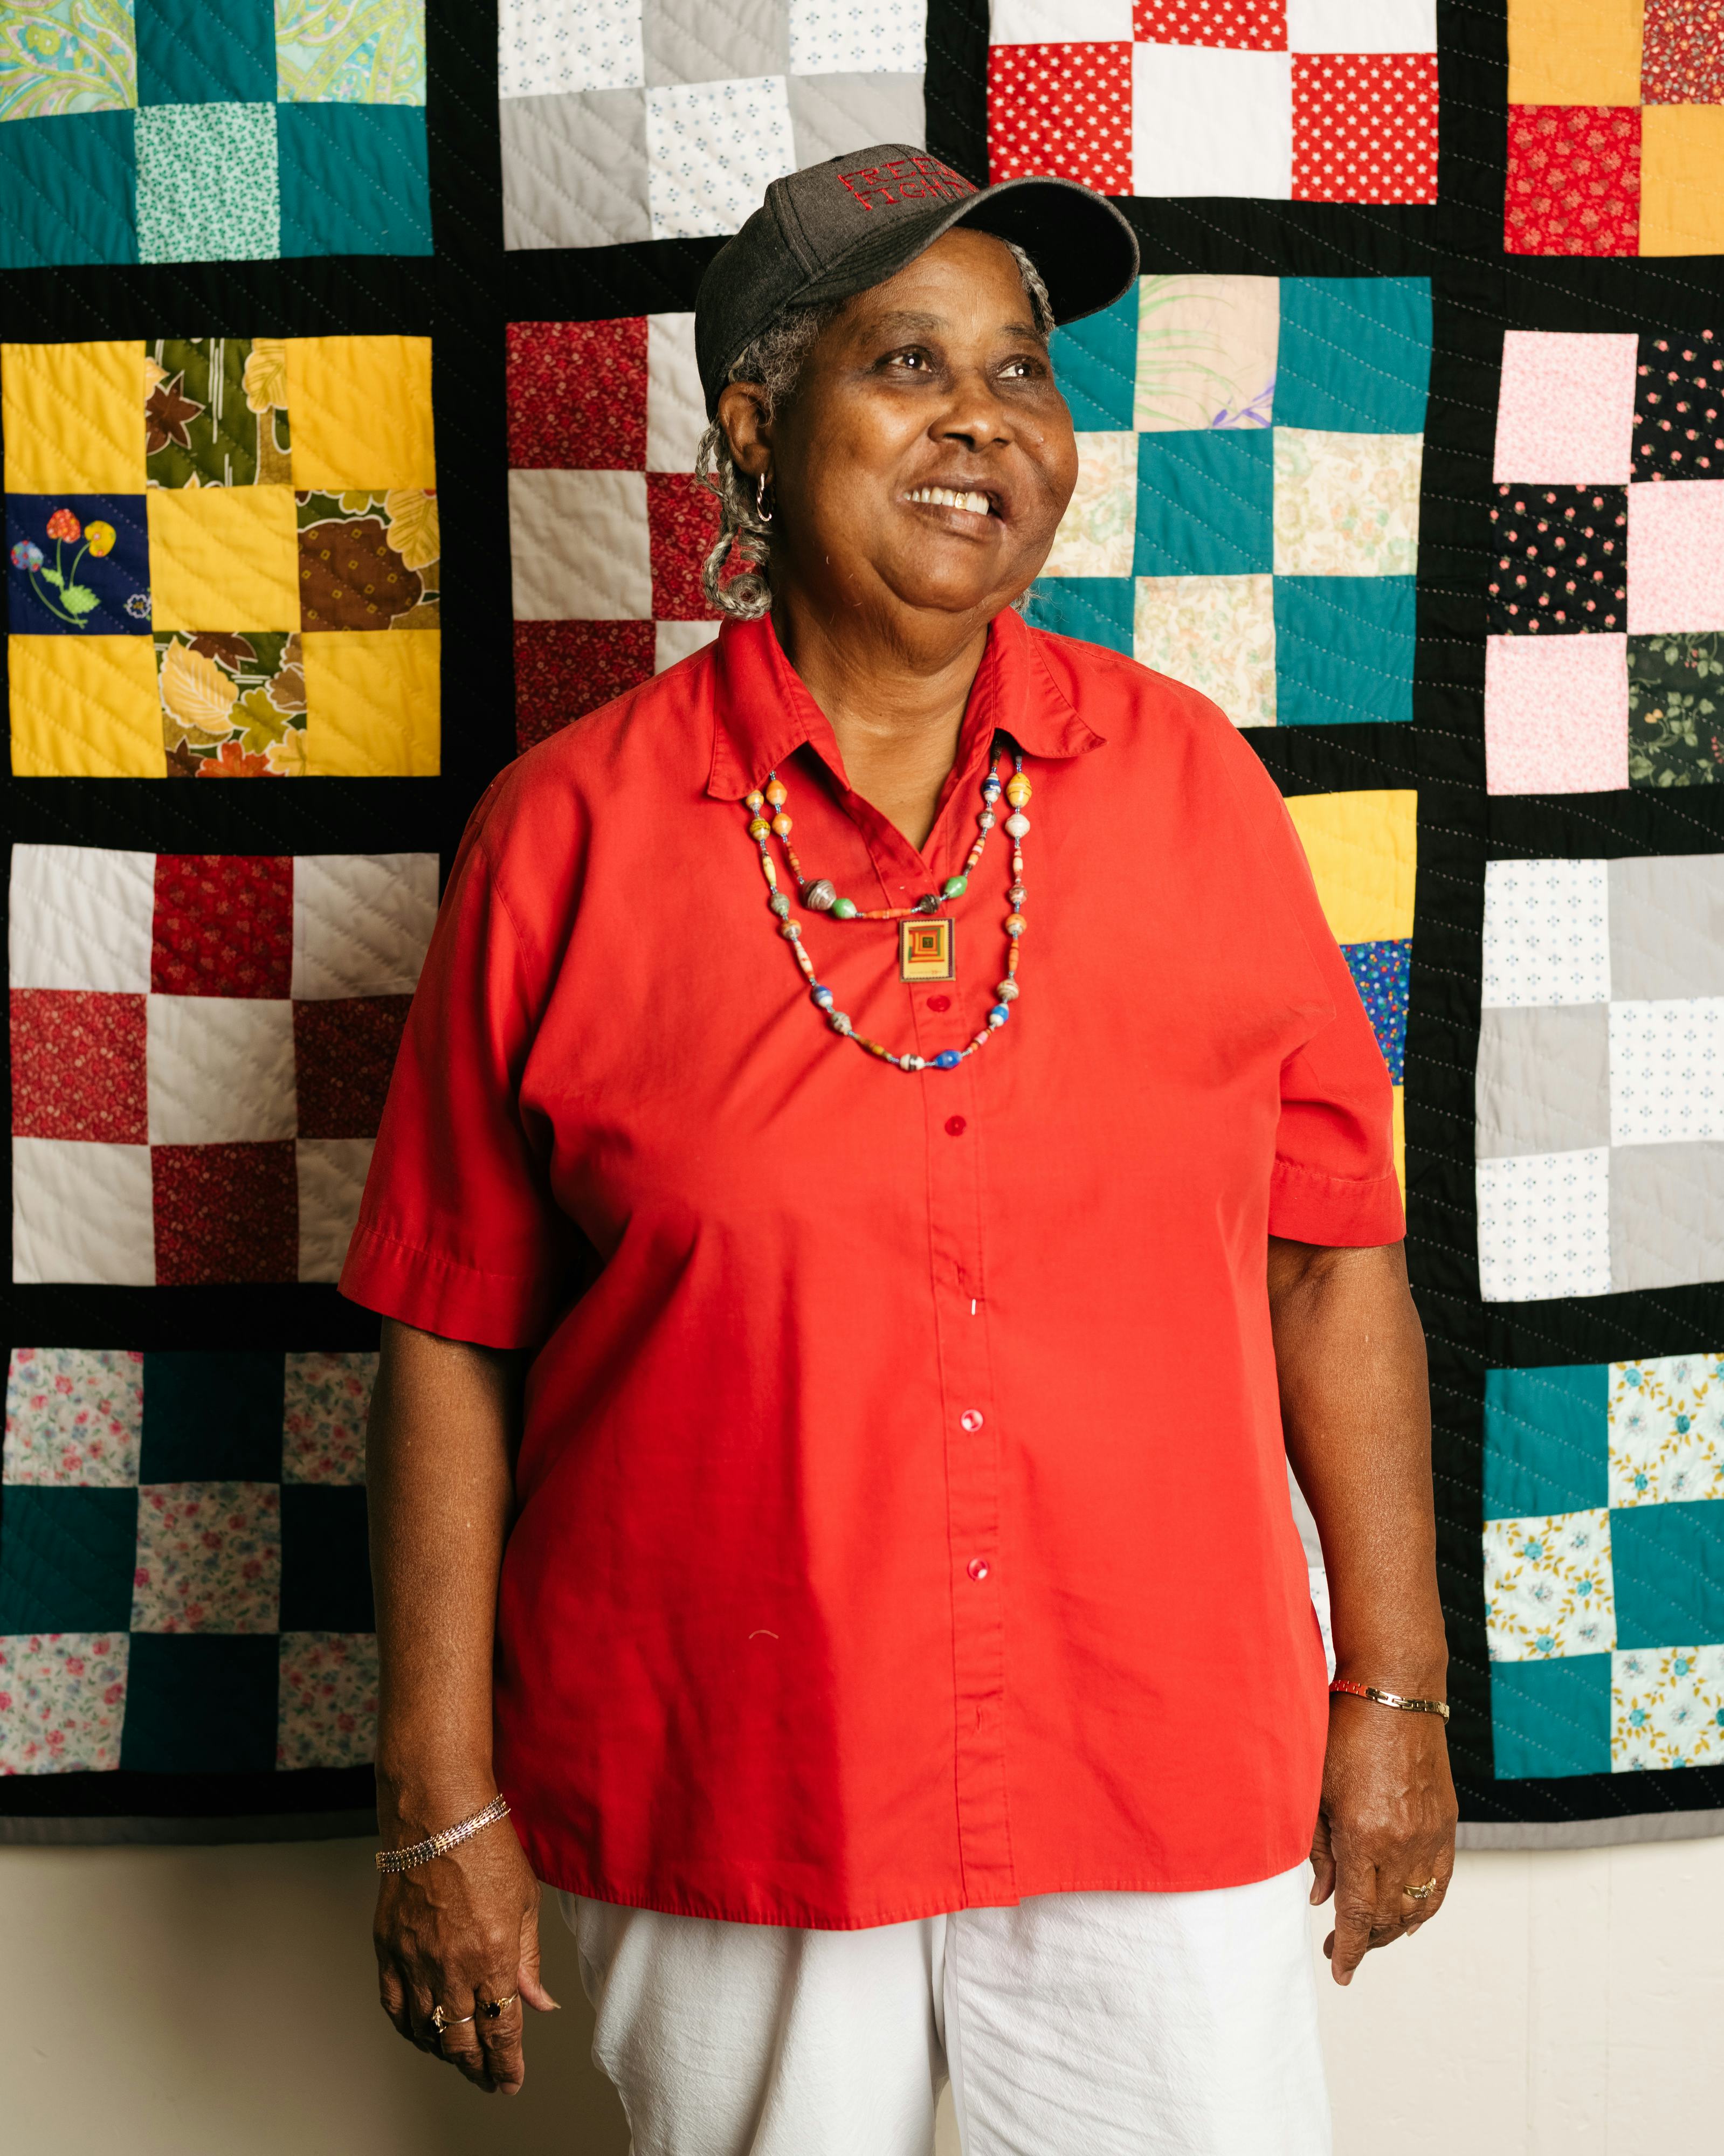 Mary Ann Pettway manages the Gee's Bend Quilters Collective, makers of quilts exhibited at the Whitney Museum of American Art and elsewhere.